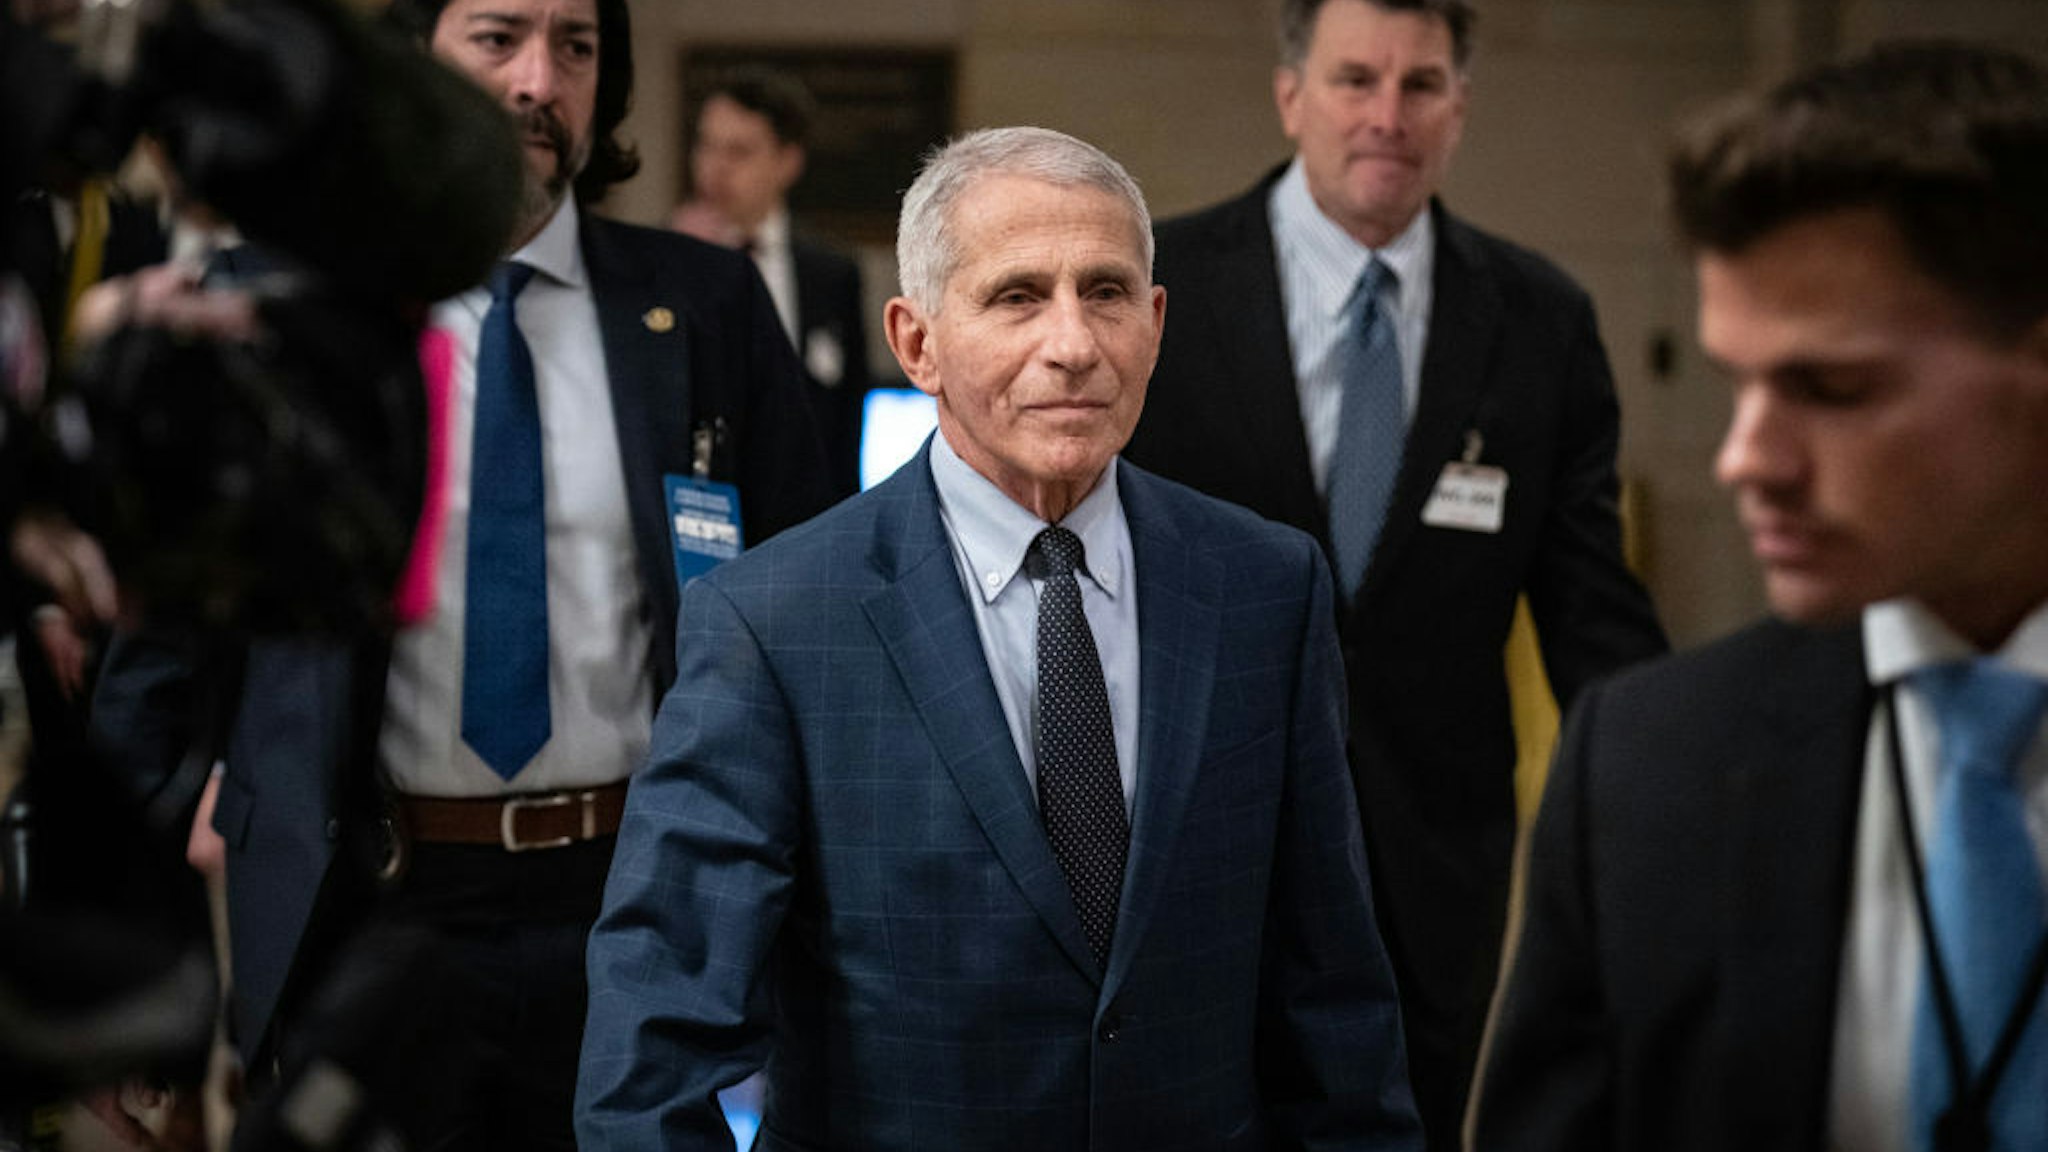 WASHINGTON, DC - JANUARY 8: Dr. Anthony Fauci, former director of the National Institute of Allergy and Infectious Diseases (NIAID), arrives for a closed-door interview with the House Select Subcommittee on the Coronavirus Pandemic at the U.S. Capitol January 8, 2024 in Washington, DC. Fauci is expected to face questioning about the origins of COVID-19, vaccine mandates and how to prevent future pandemics. (Photo by Drew Angerer/Getty Images)